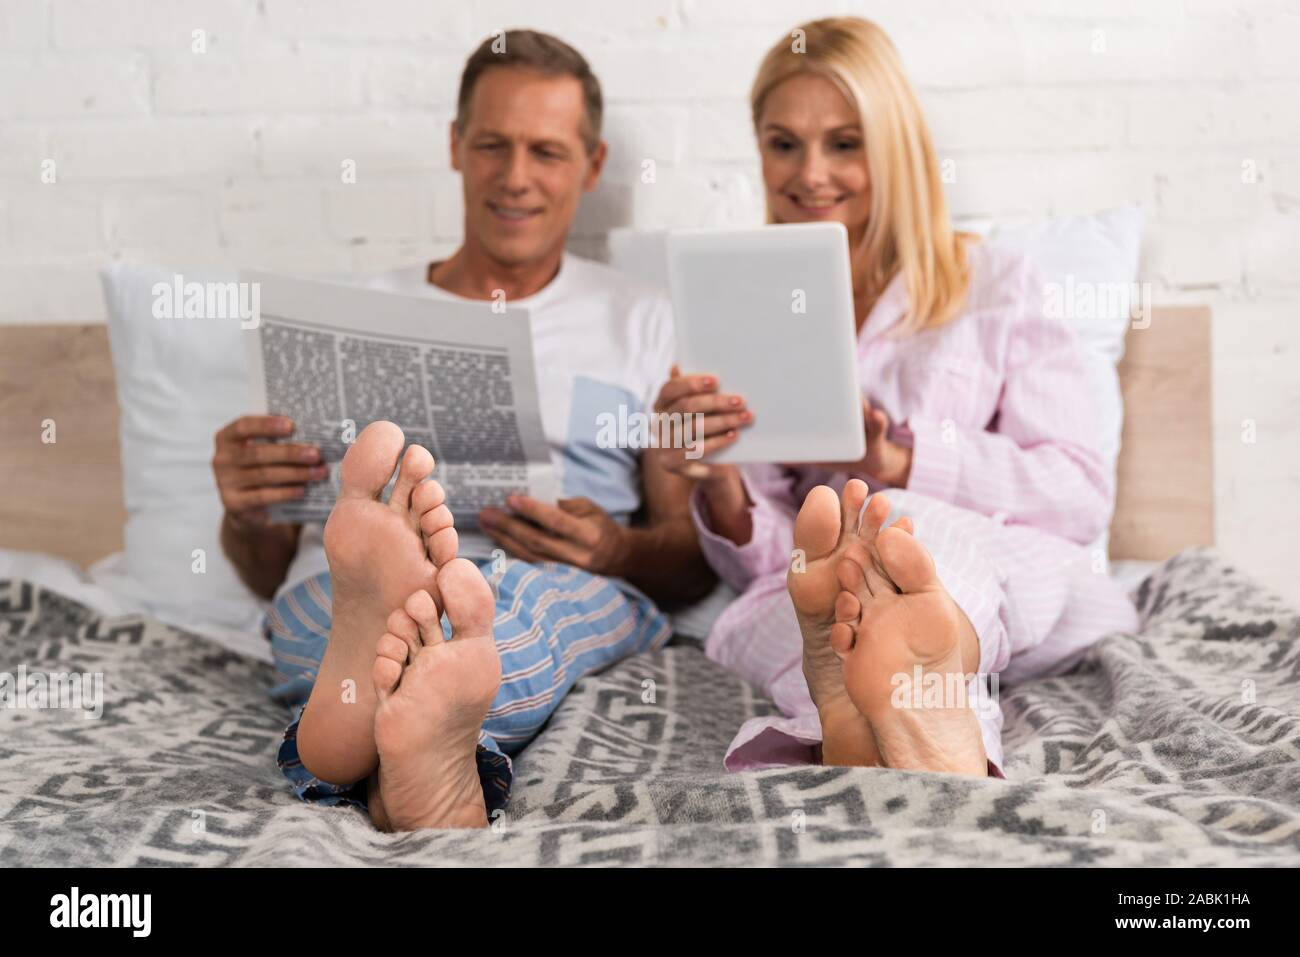 Man reading newspaper while wife using digital tablet on bed Stock Photo